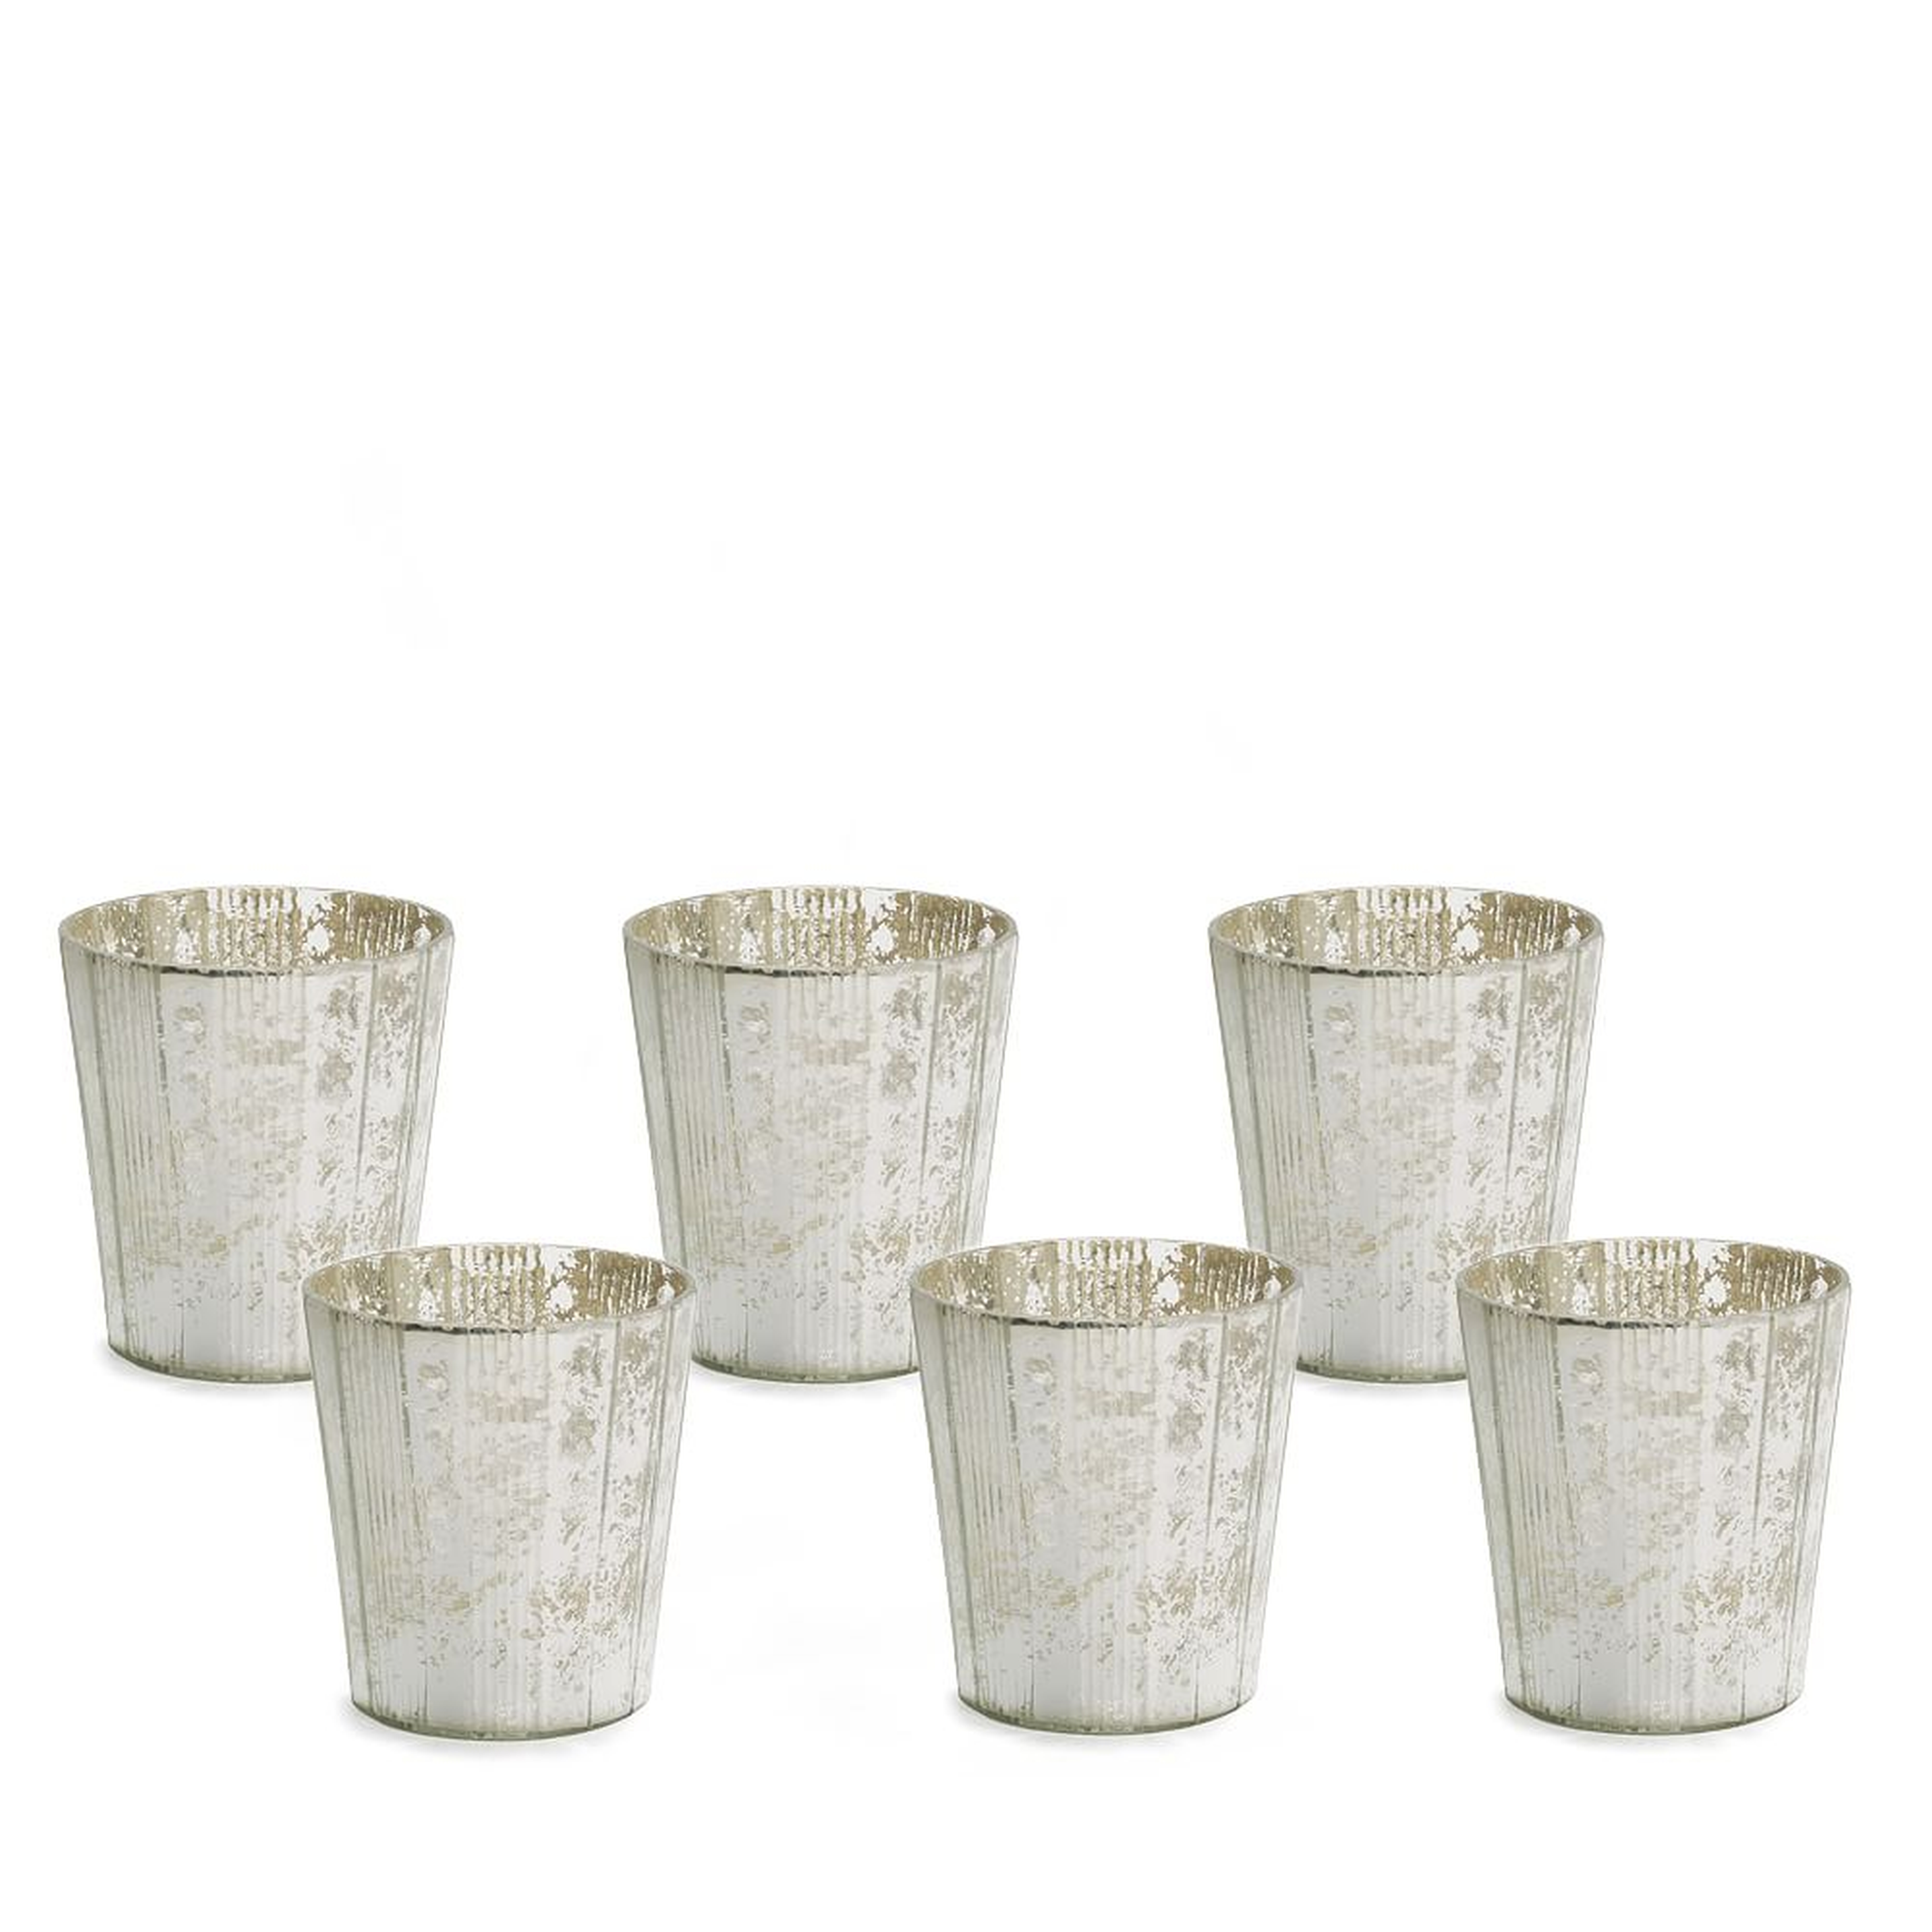 Mercury Glass Candle Holder, Set of 6, Multi, Silver - West Elm